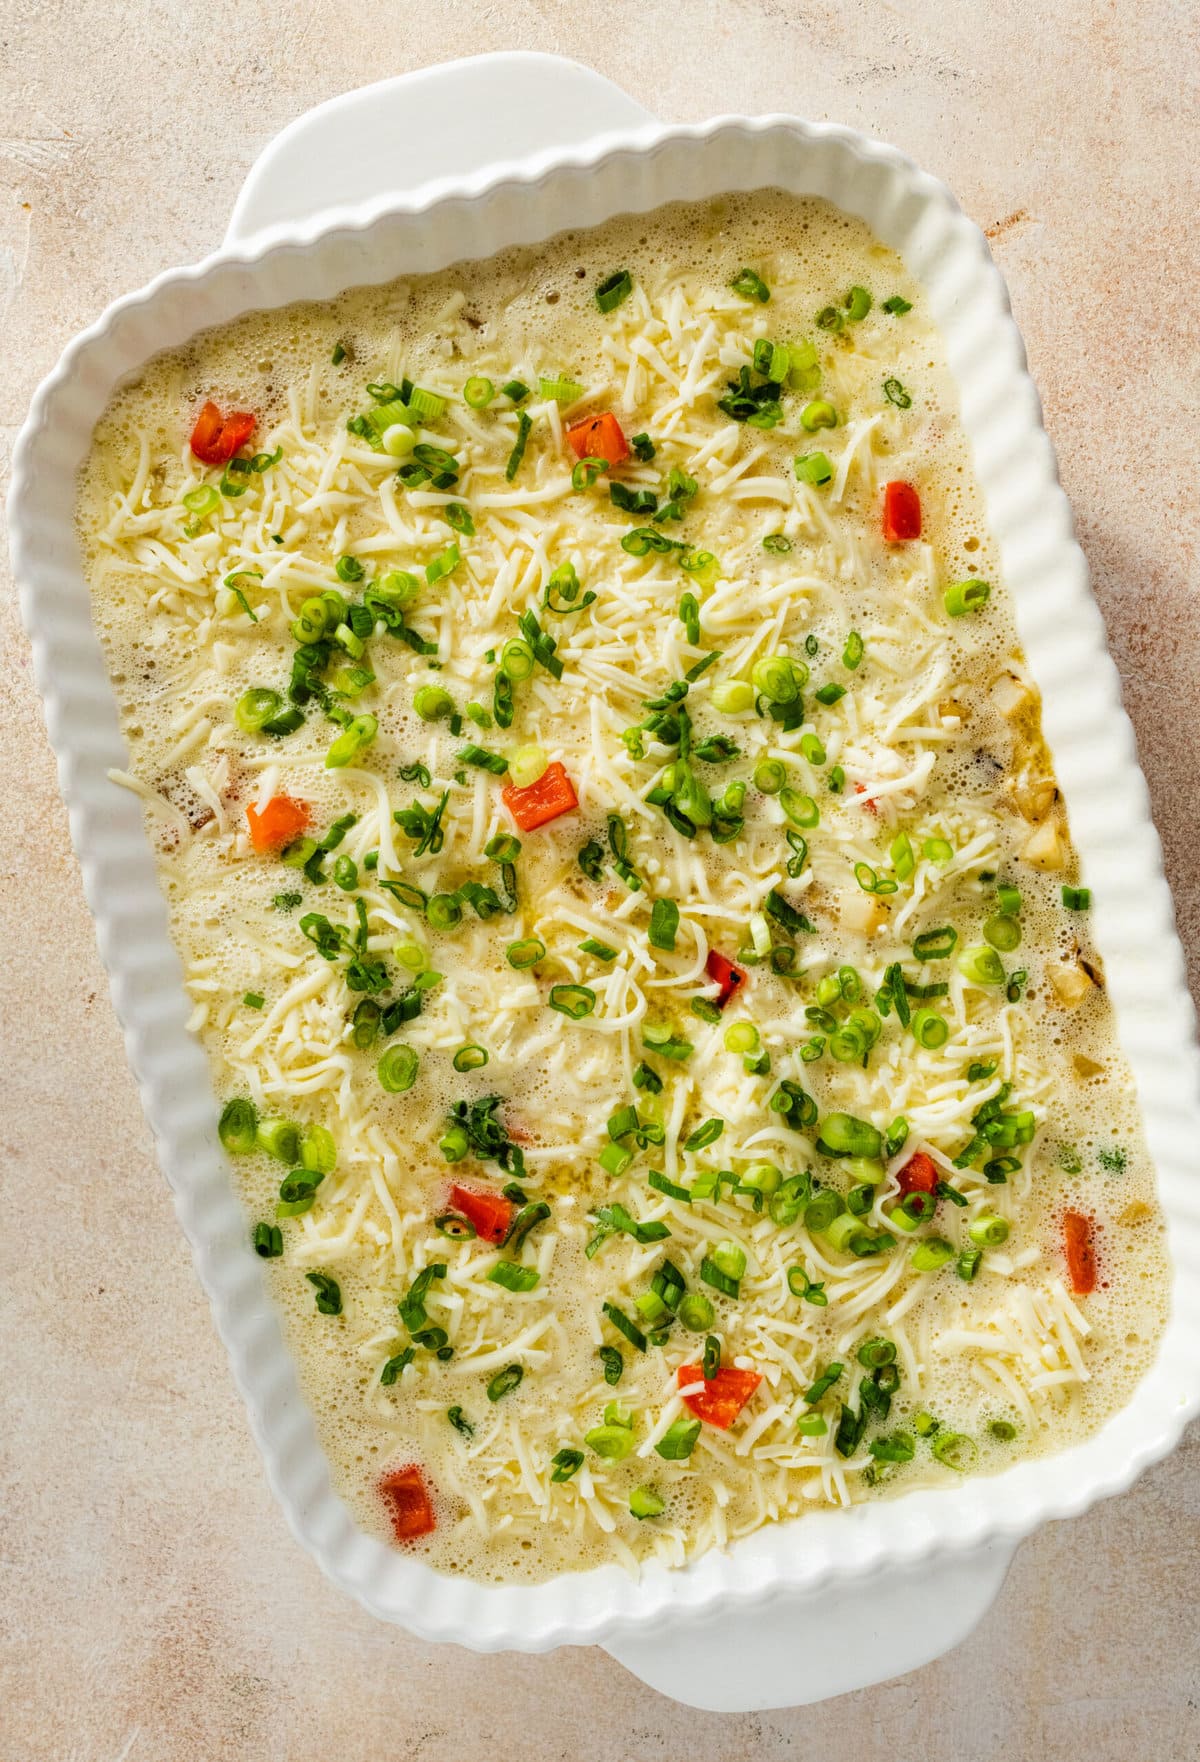 How to make breakfast casserole step-by-step: add the egg and cheese mixture and top with green onions and bake.